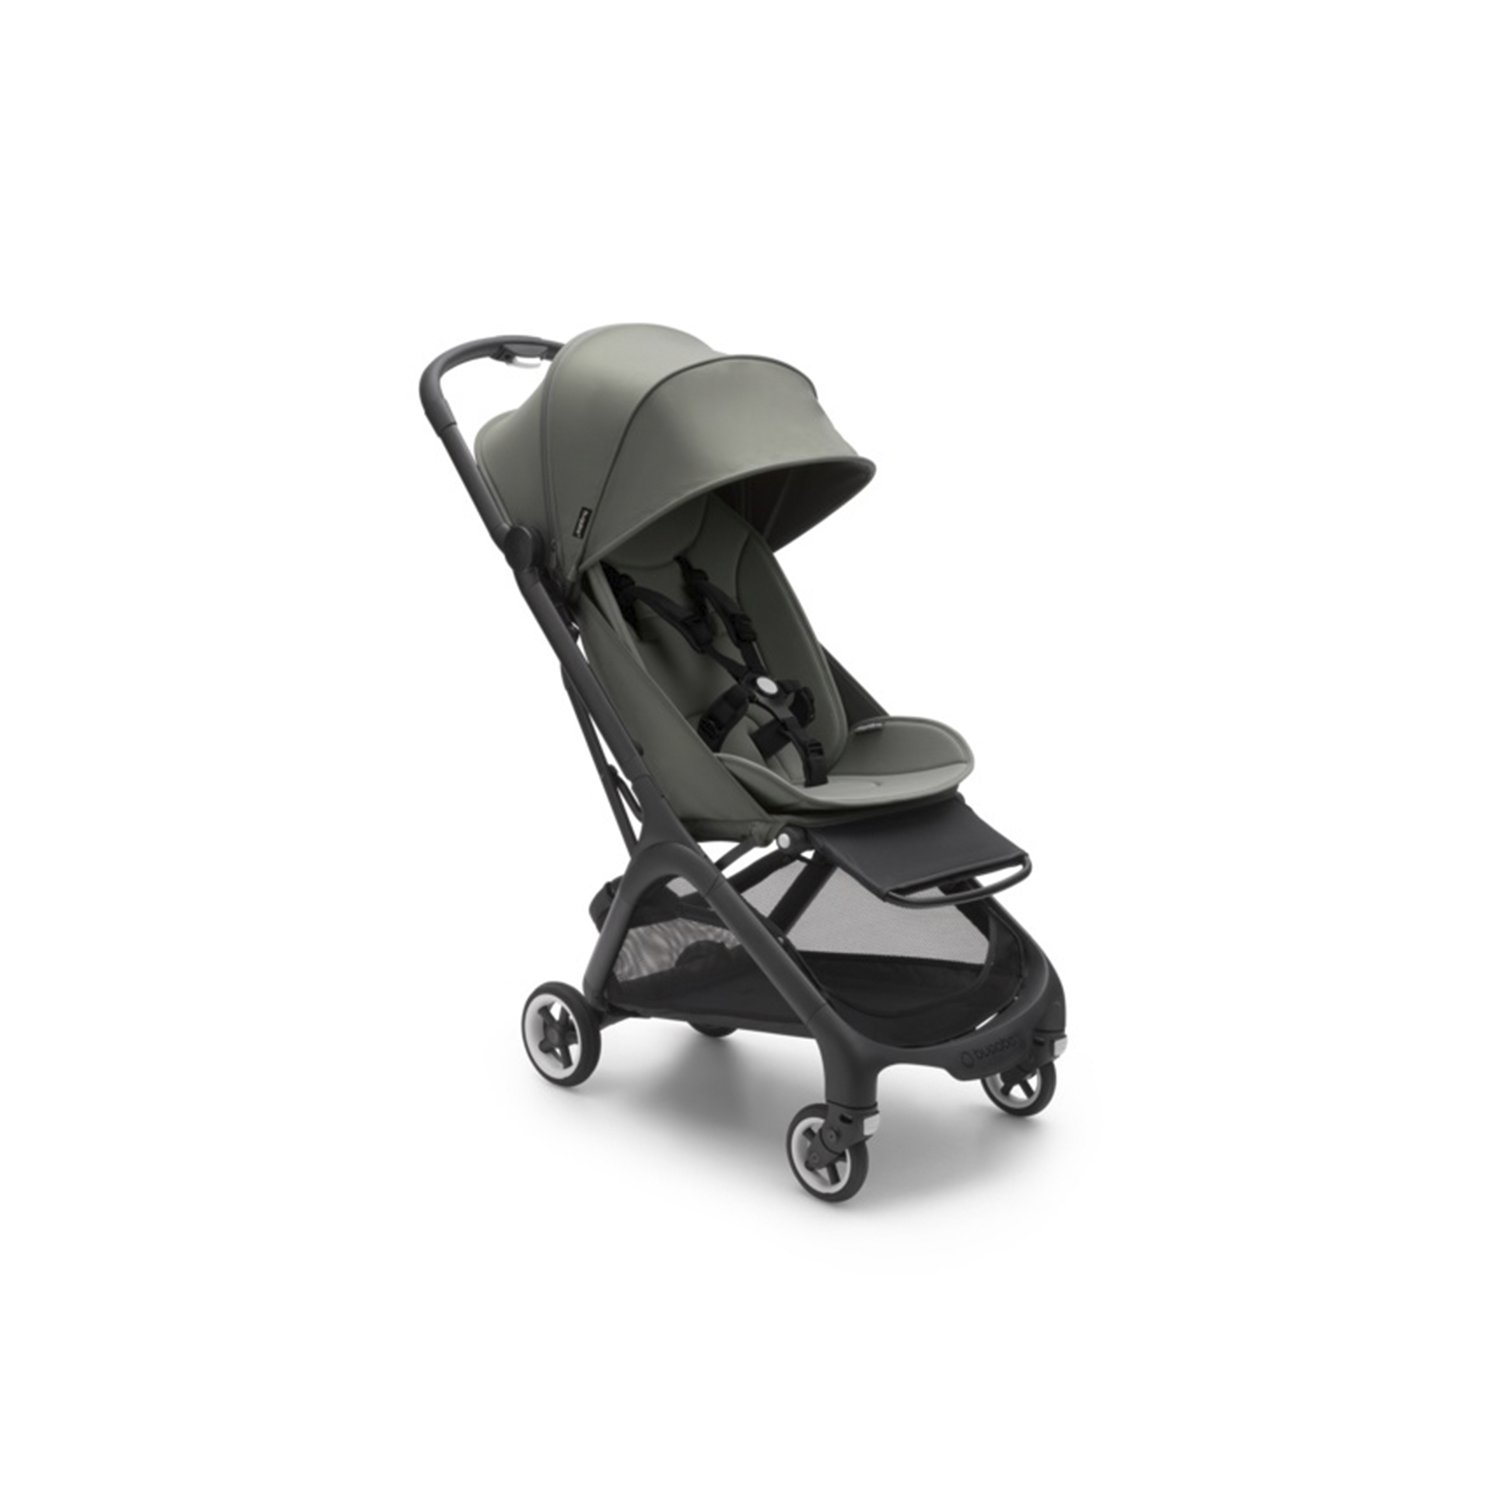 Прогулочная коляска Bugaboo Butterfly complete Black/Forest green прогулочная коляска bugaboo bee 6 complete